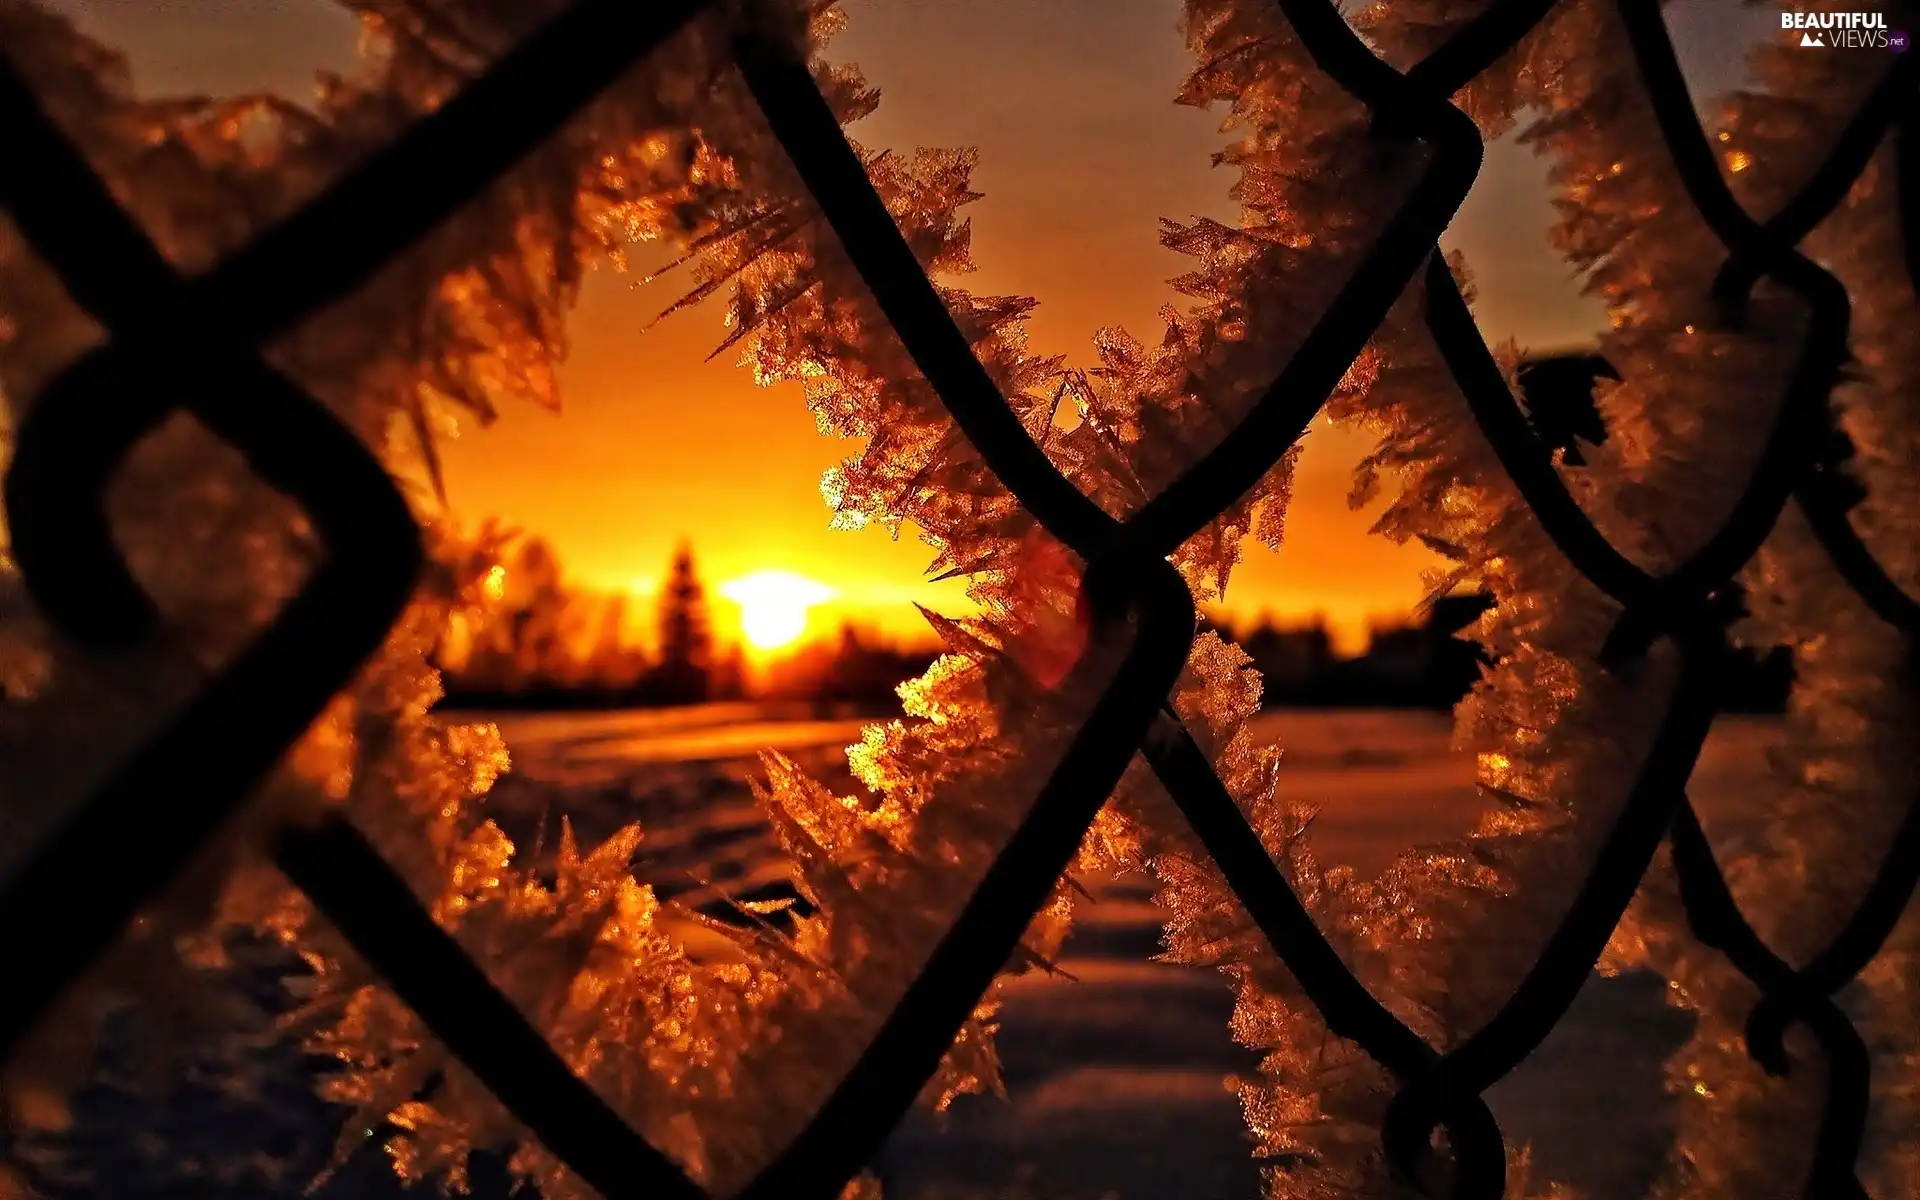 Fance, winter, Great Sunsets